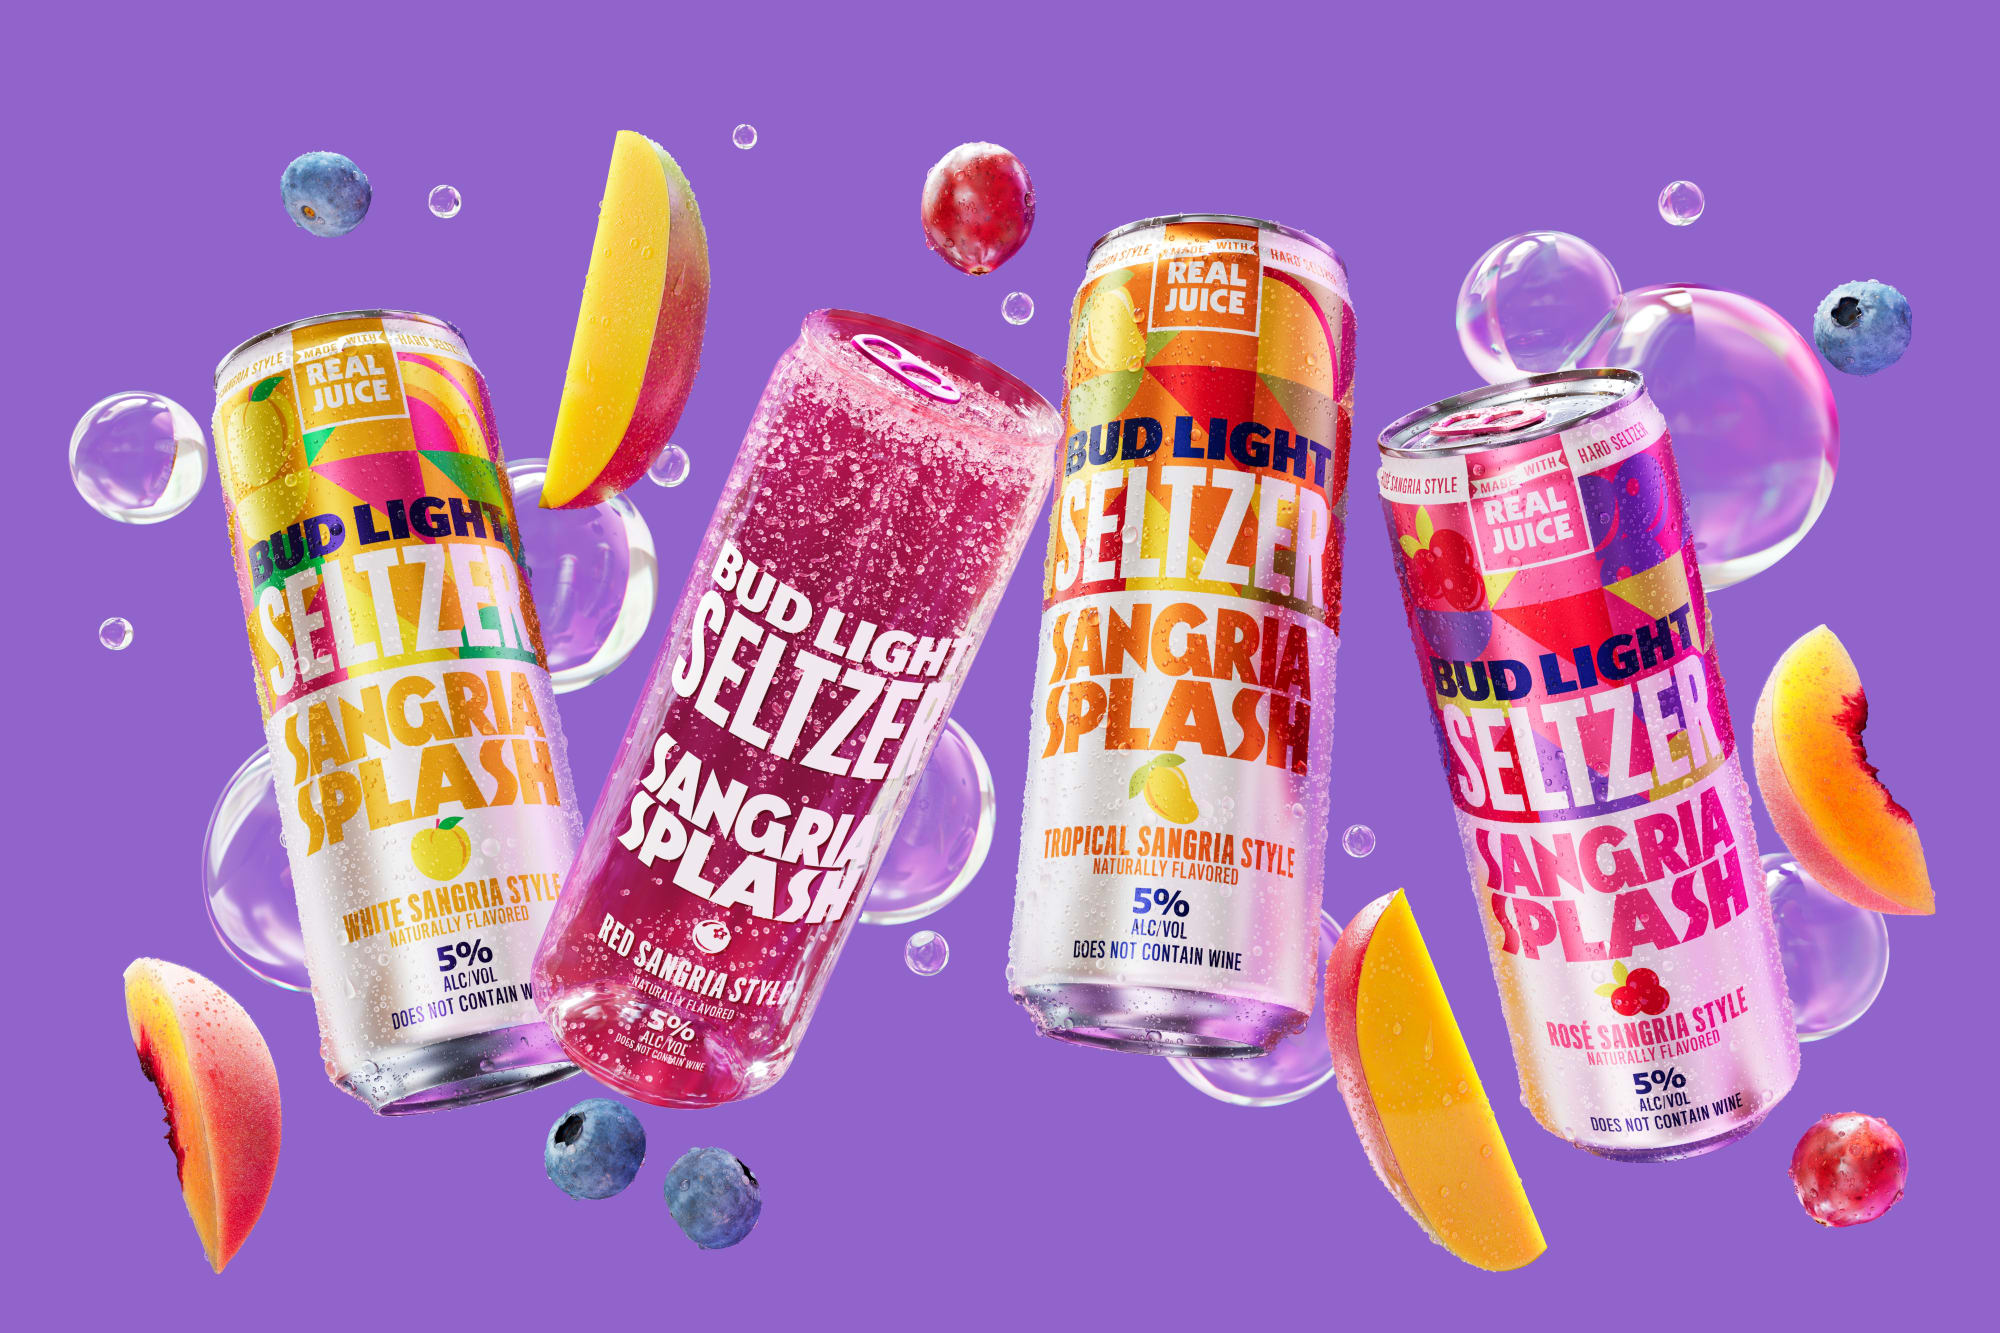 Bud Seltzer Variety Pack bursts all those misconceptions